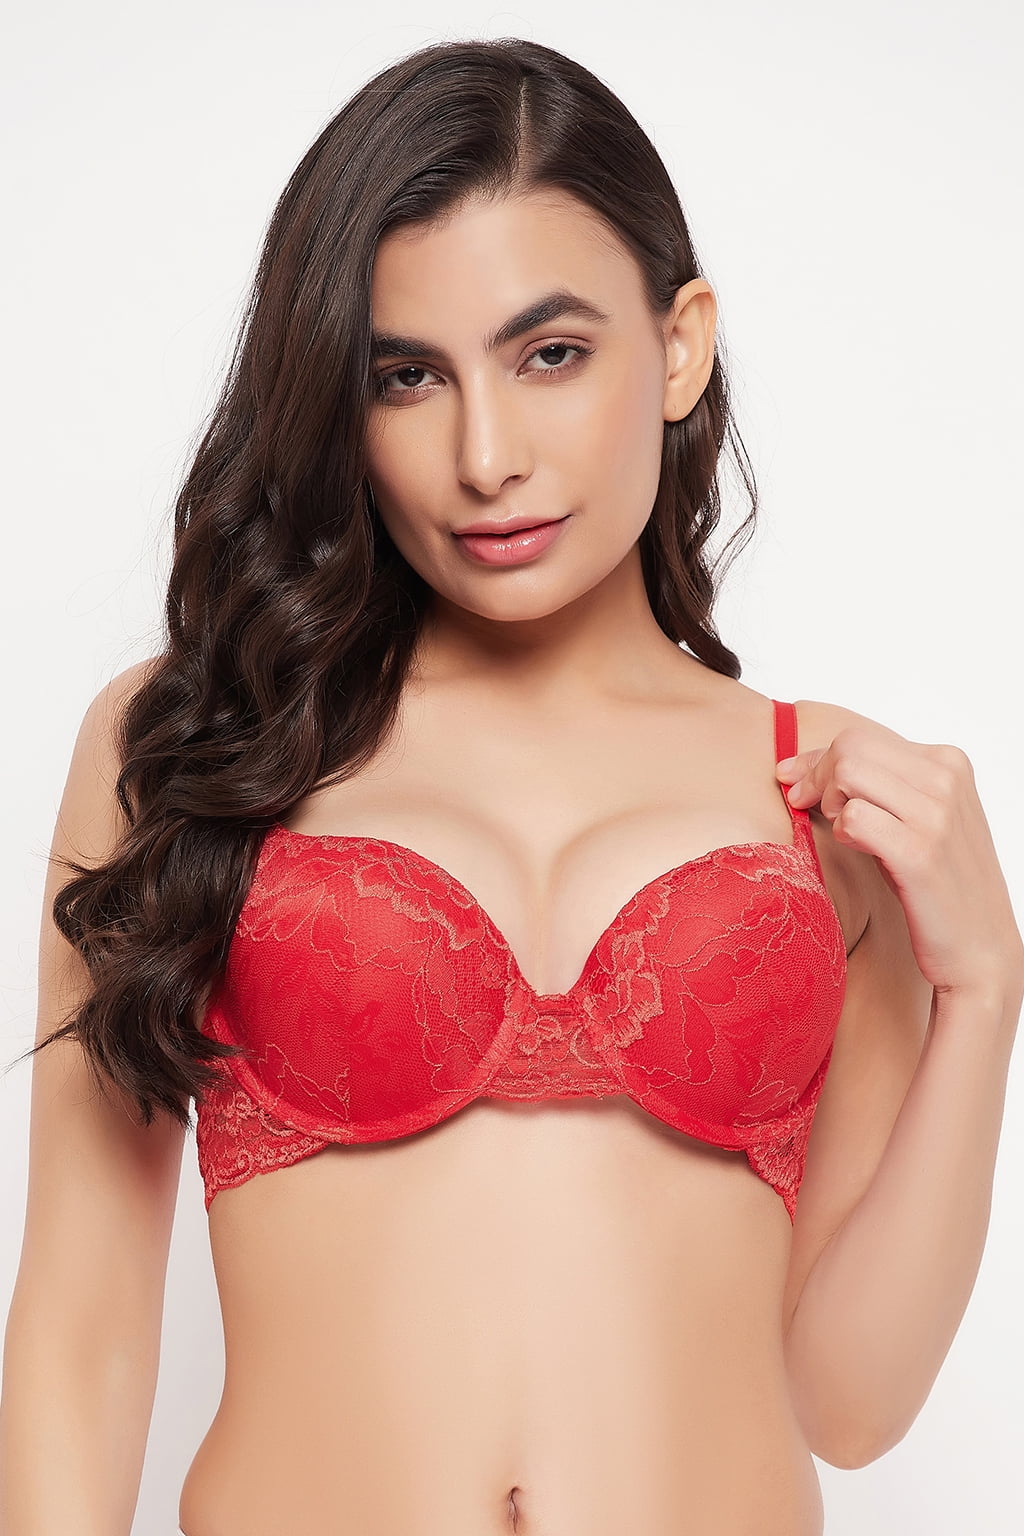 Clovia Level-3 Push-Up Padded Underwired Demi Cup Bra in Red - Lace 